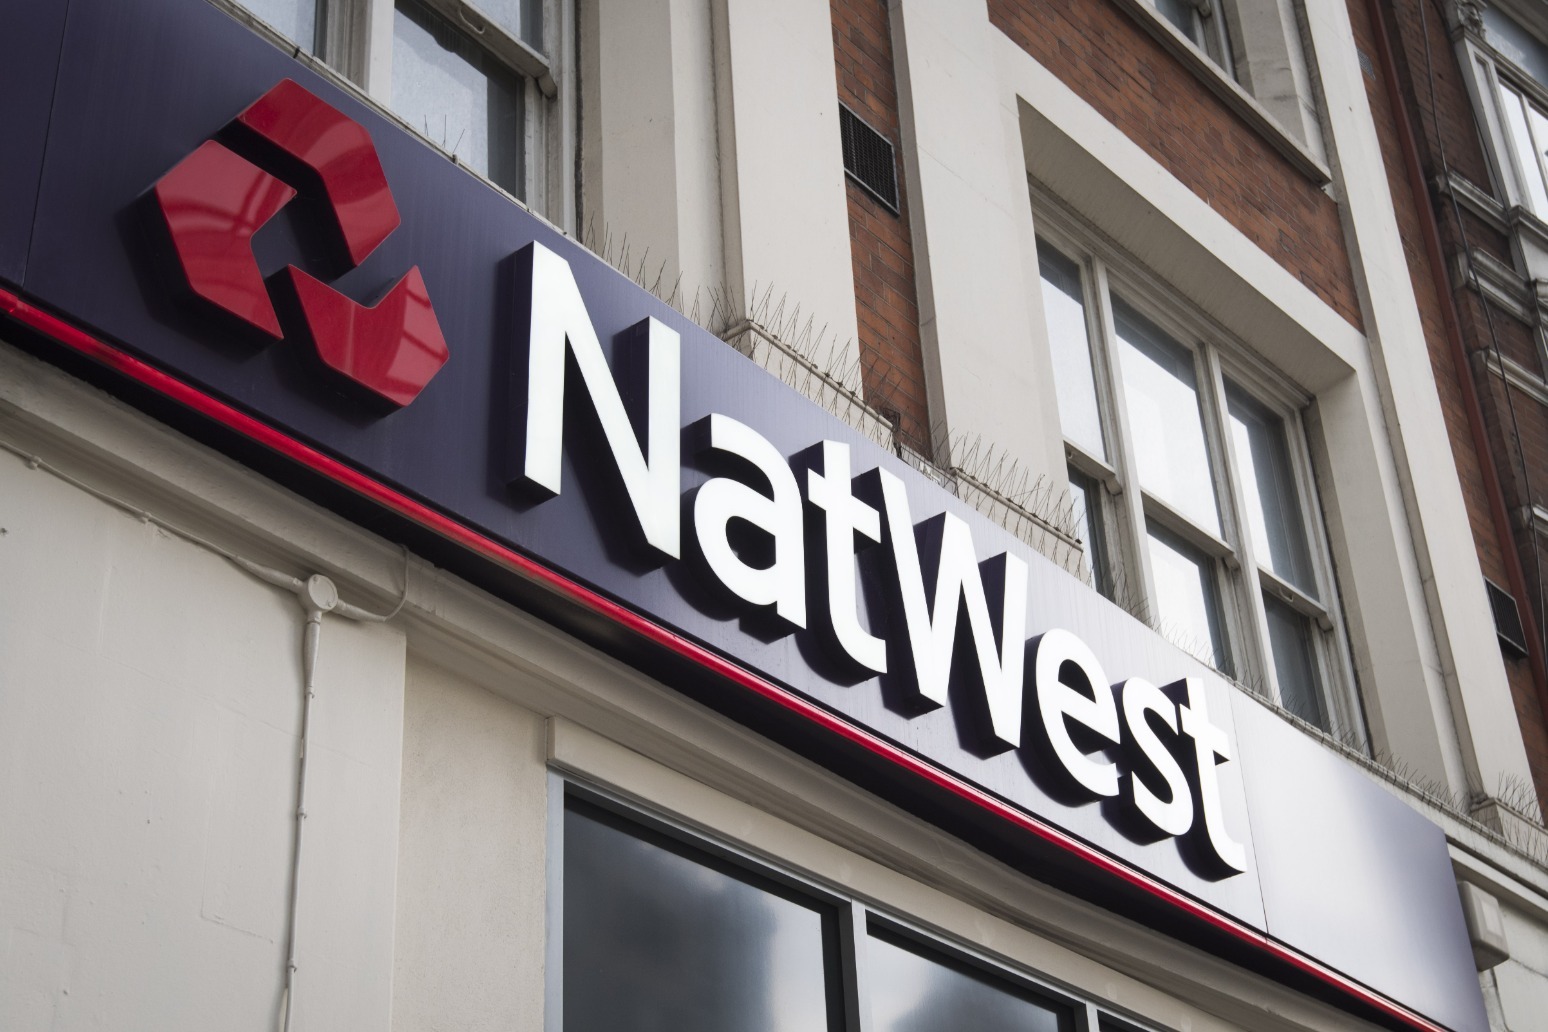 NatWest expected to show juicy profits amid interest rate hikes 